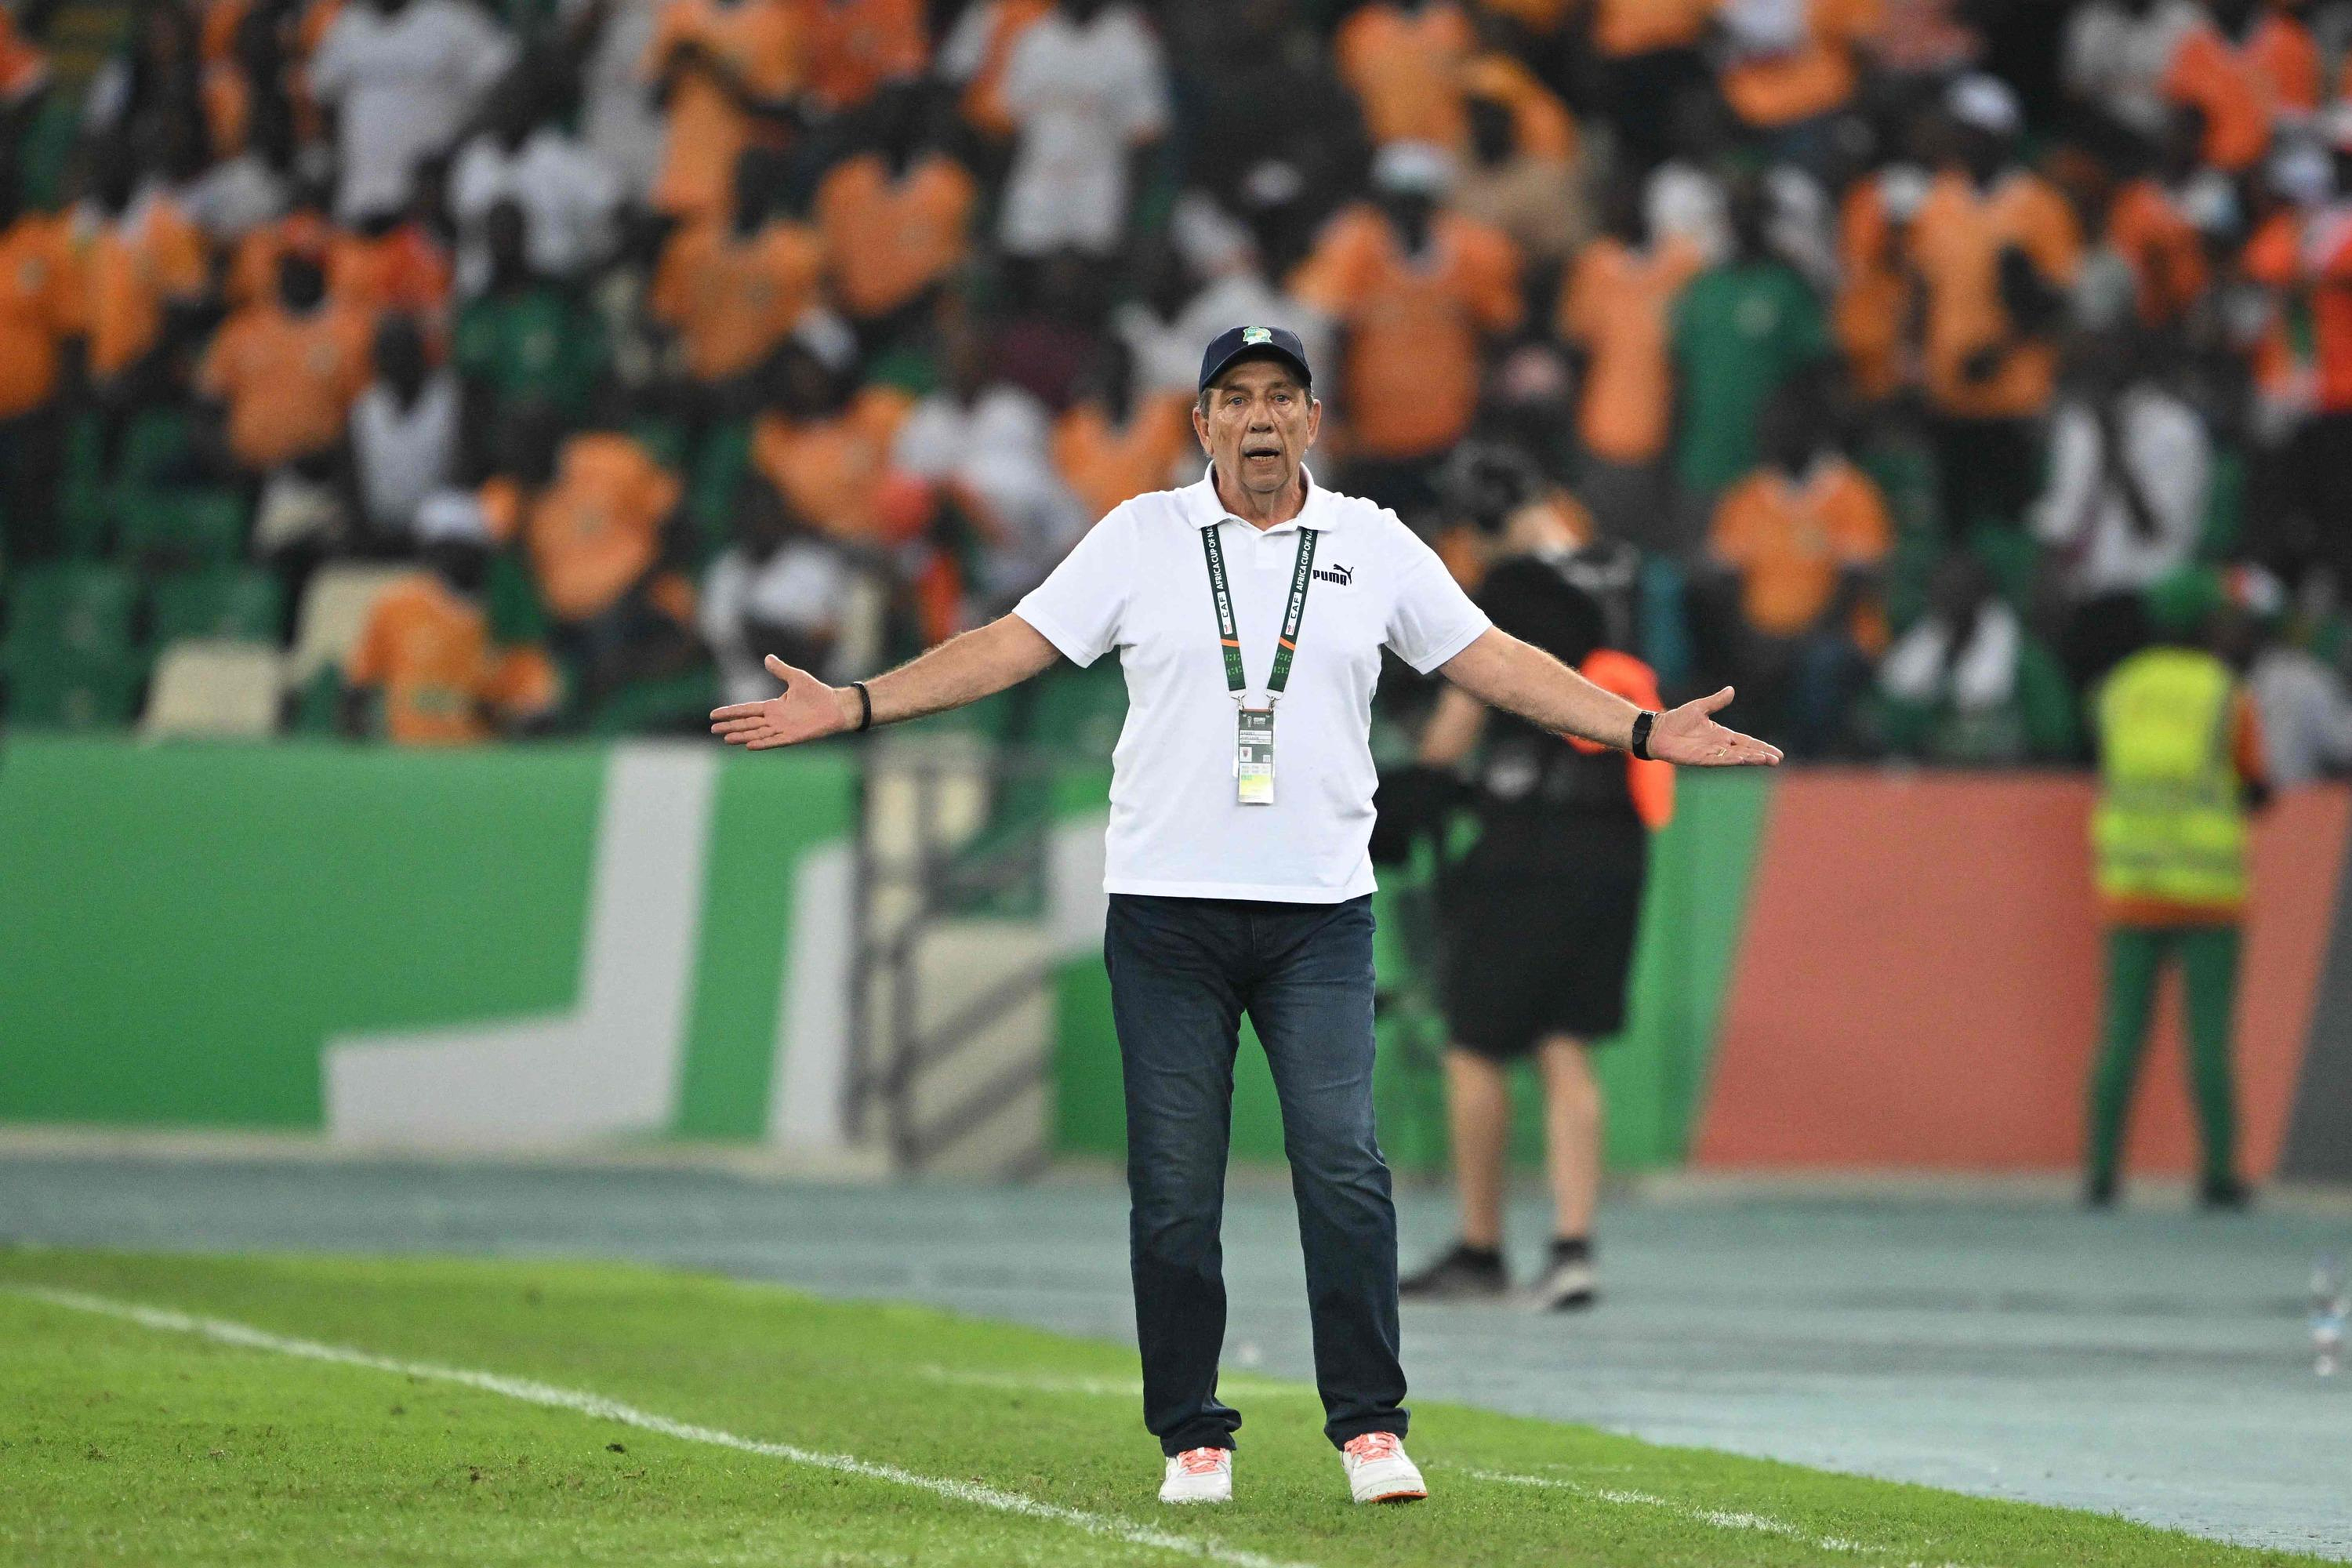 CAN: after a “nightmare” match for Ivory Coast, Gasset “hopes” for a place in the round of 16